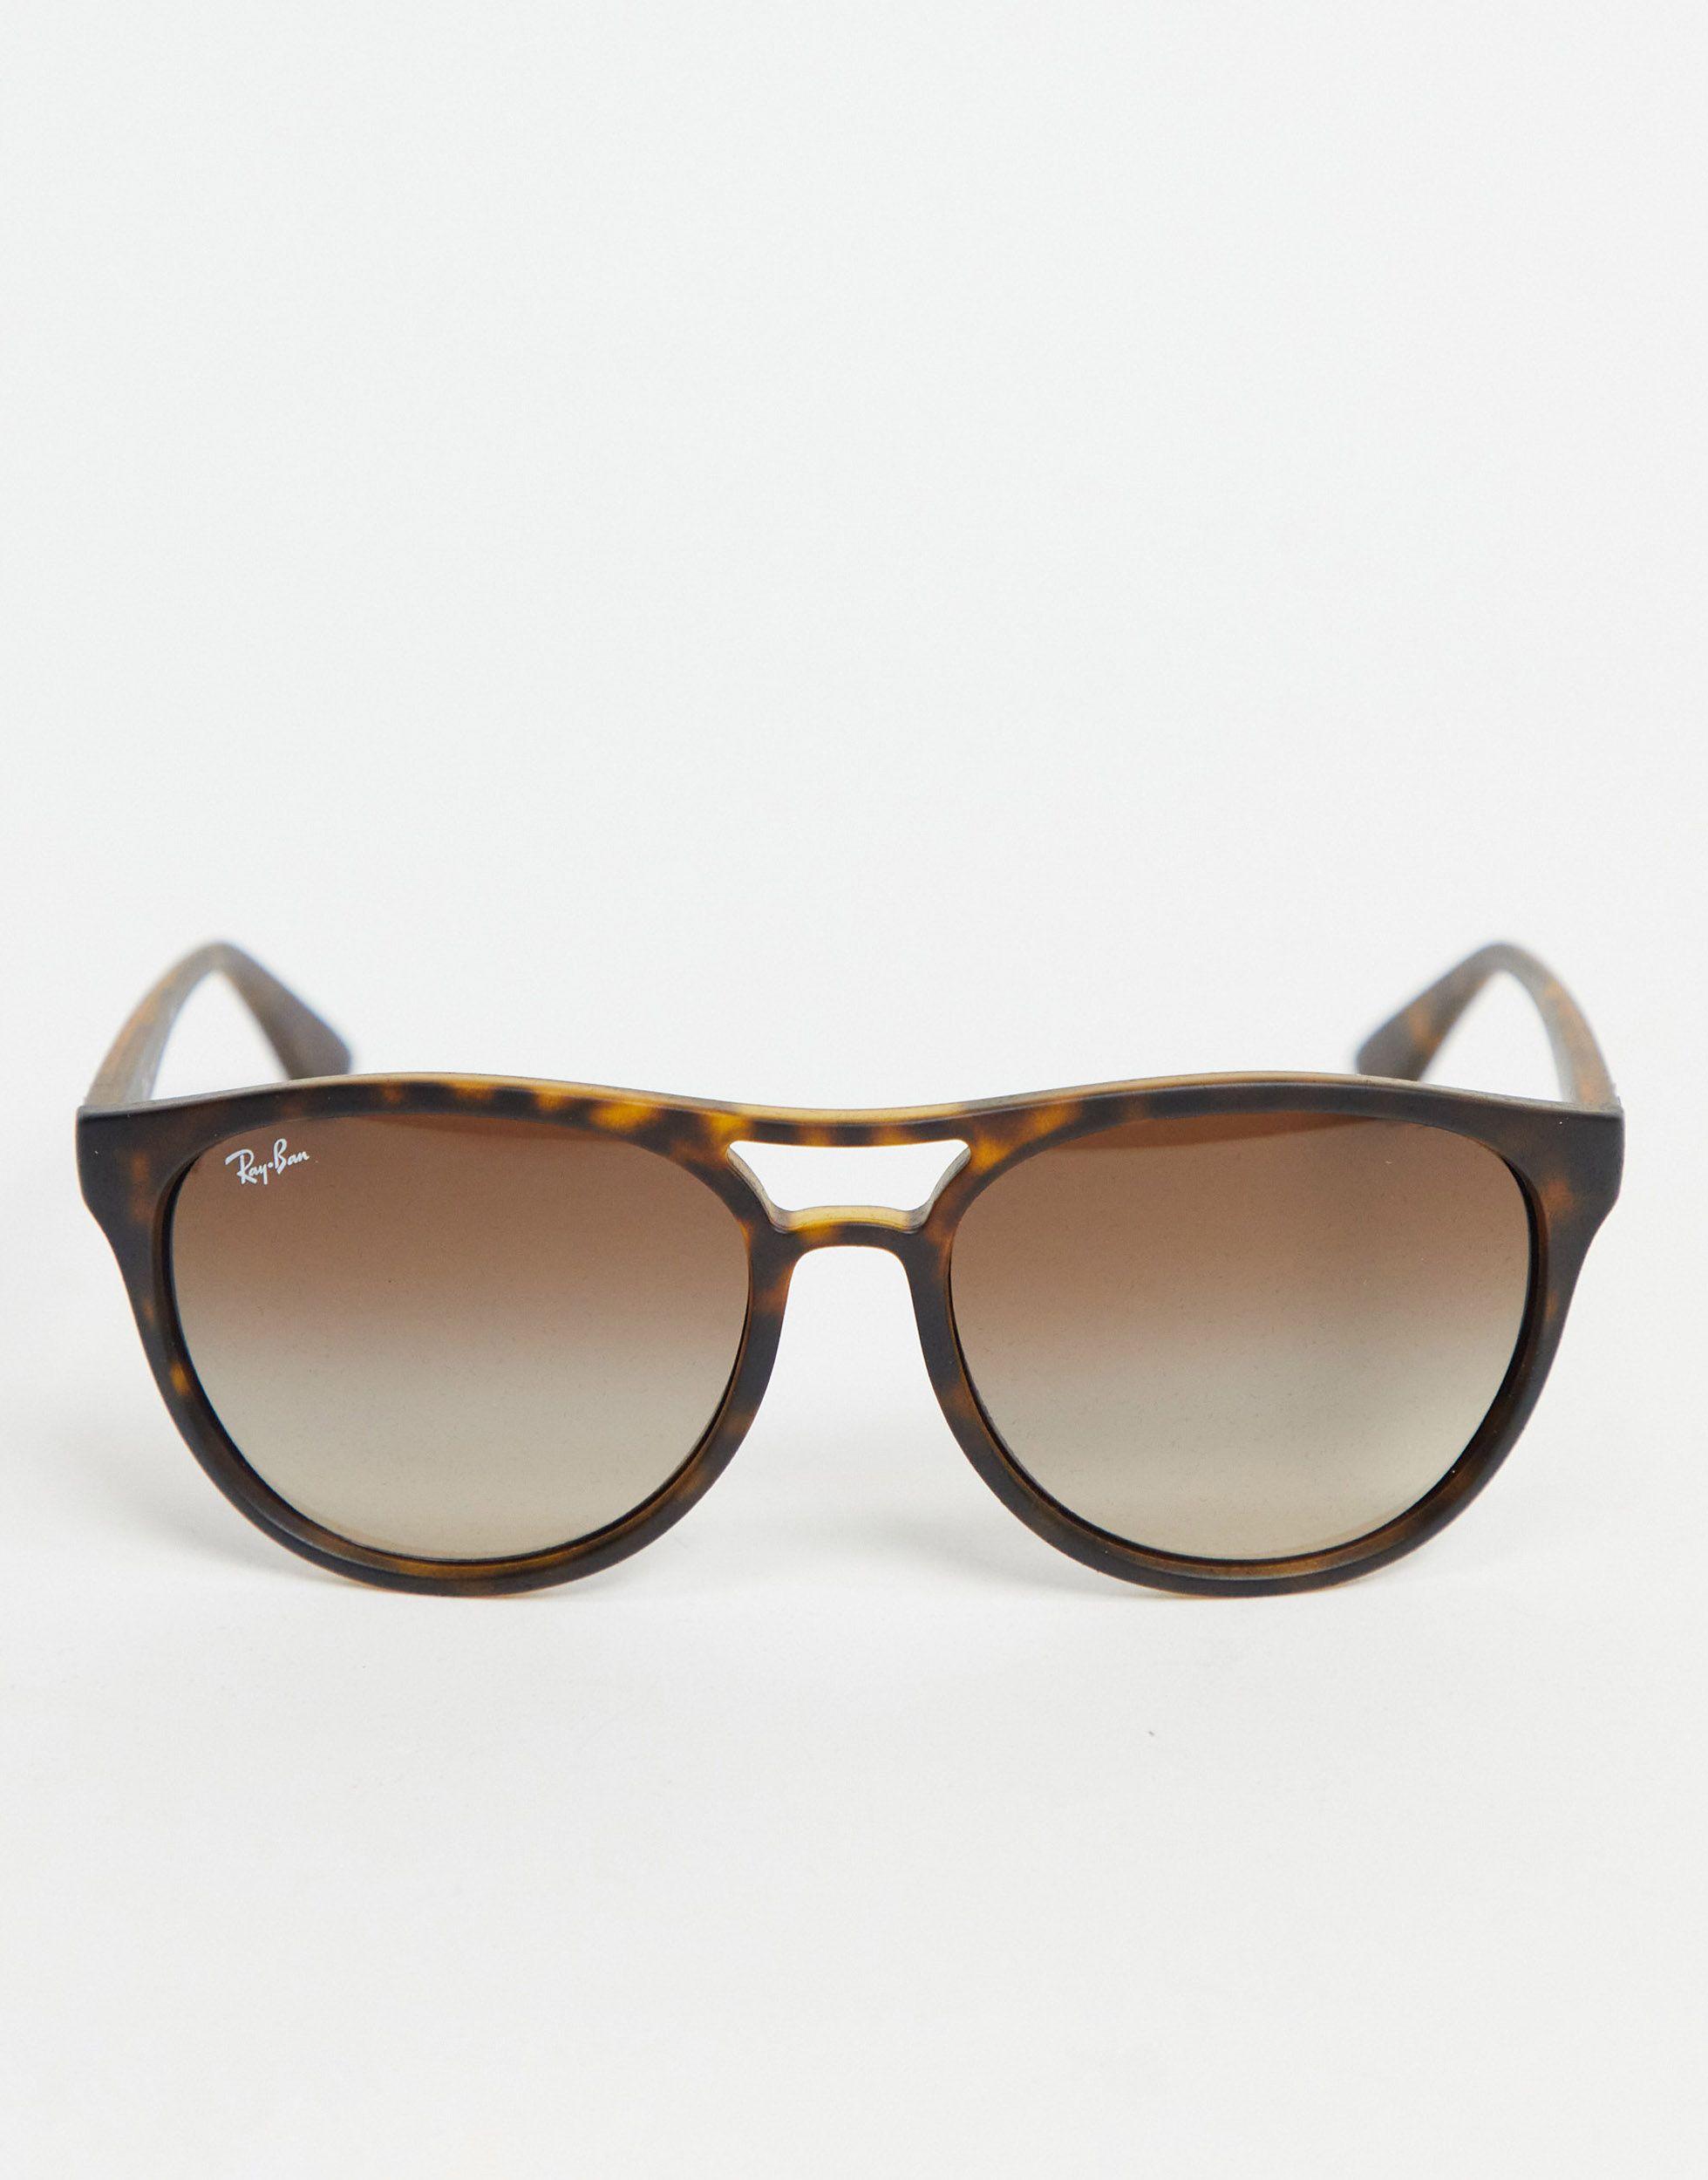 Ray-Ban 0rb4170 Oversized Sunglasses in Brown | Lyst